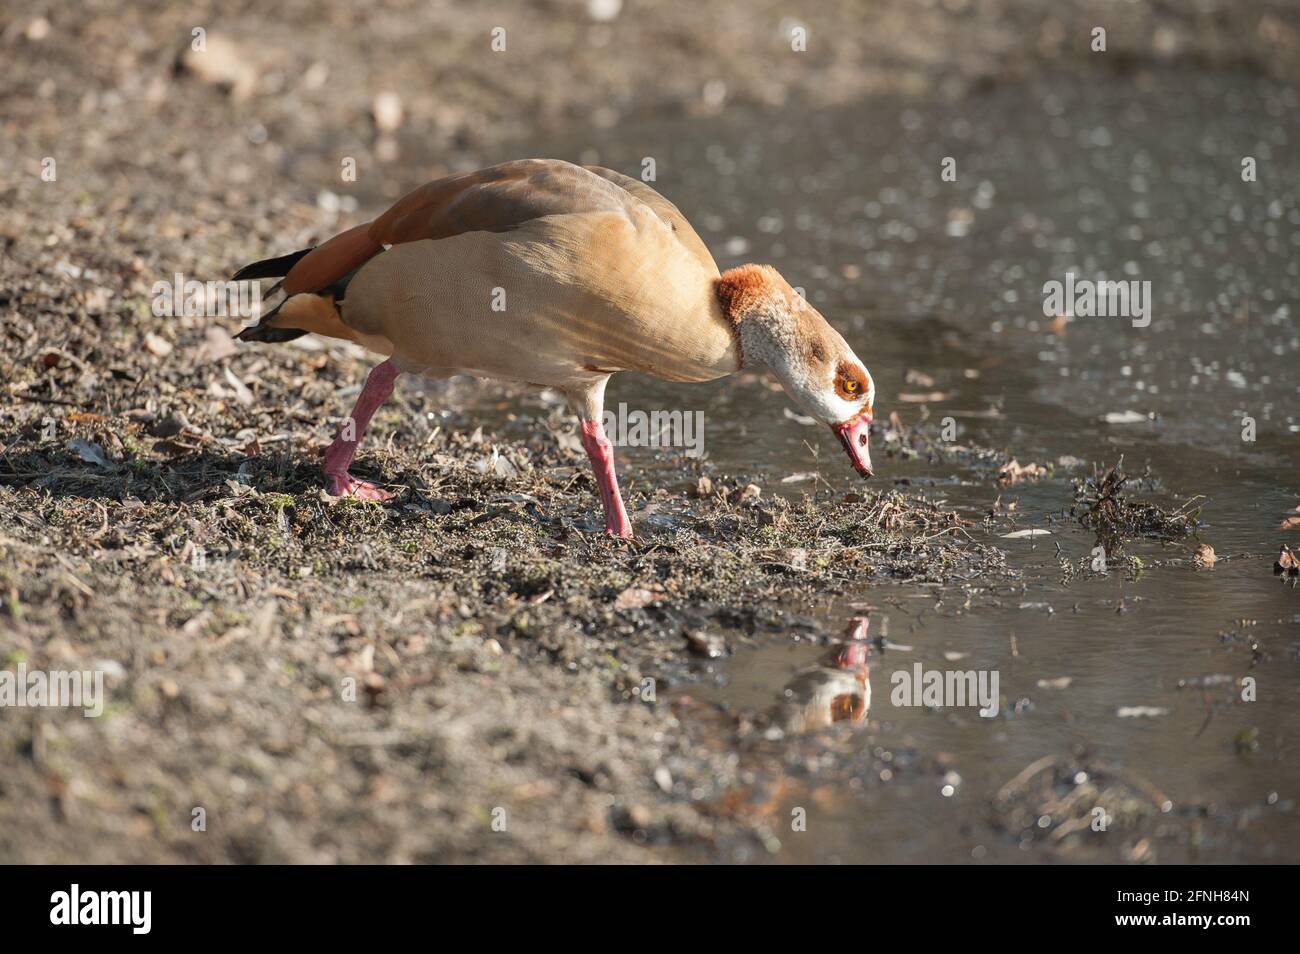 Egyptian goose and its reflection at the edge of a lake Stock Photo